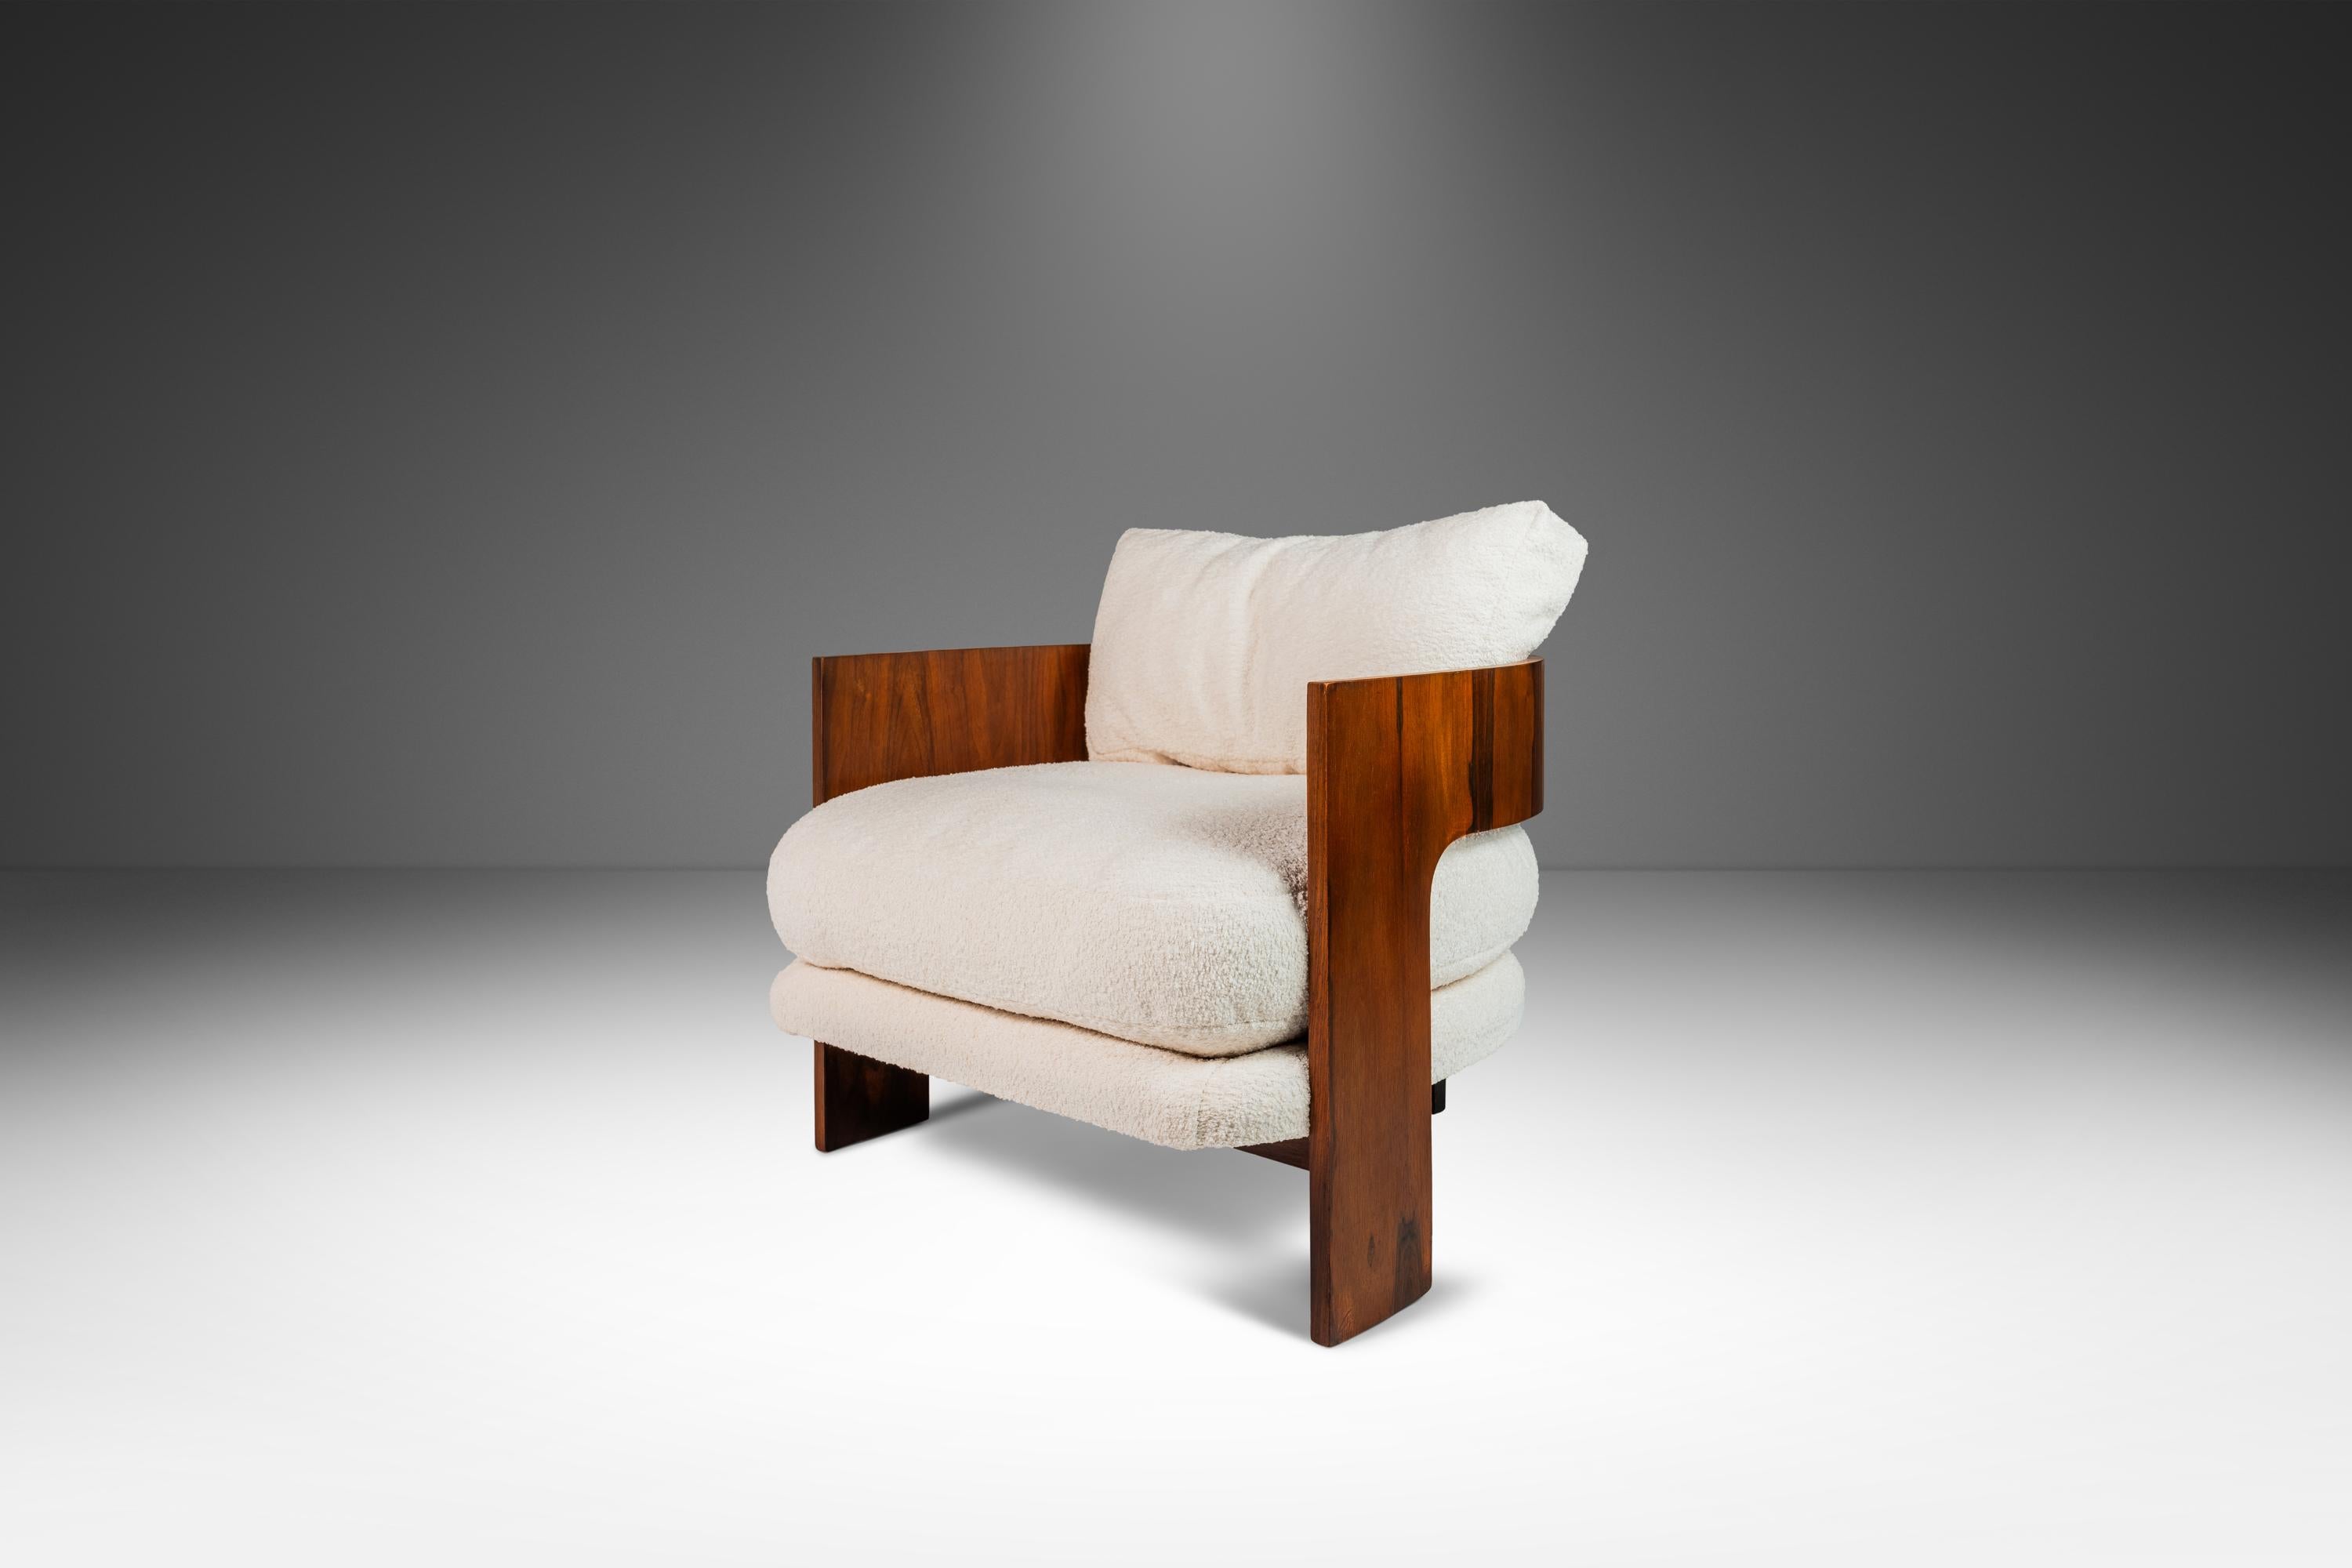 Introducing the epitome of mid-century modern sophistication – the Milo Baughman Lounge Chair Model ON-3, lovingly restored and reupholstered in sumptuous White Boucle fabric, exclusively for Thayer Coggin. This Brazilian Rosewood beauty stands as a